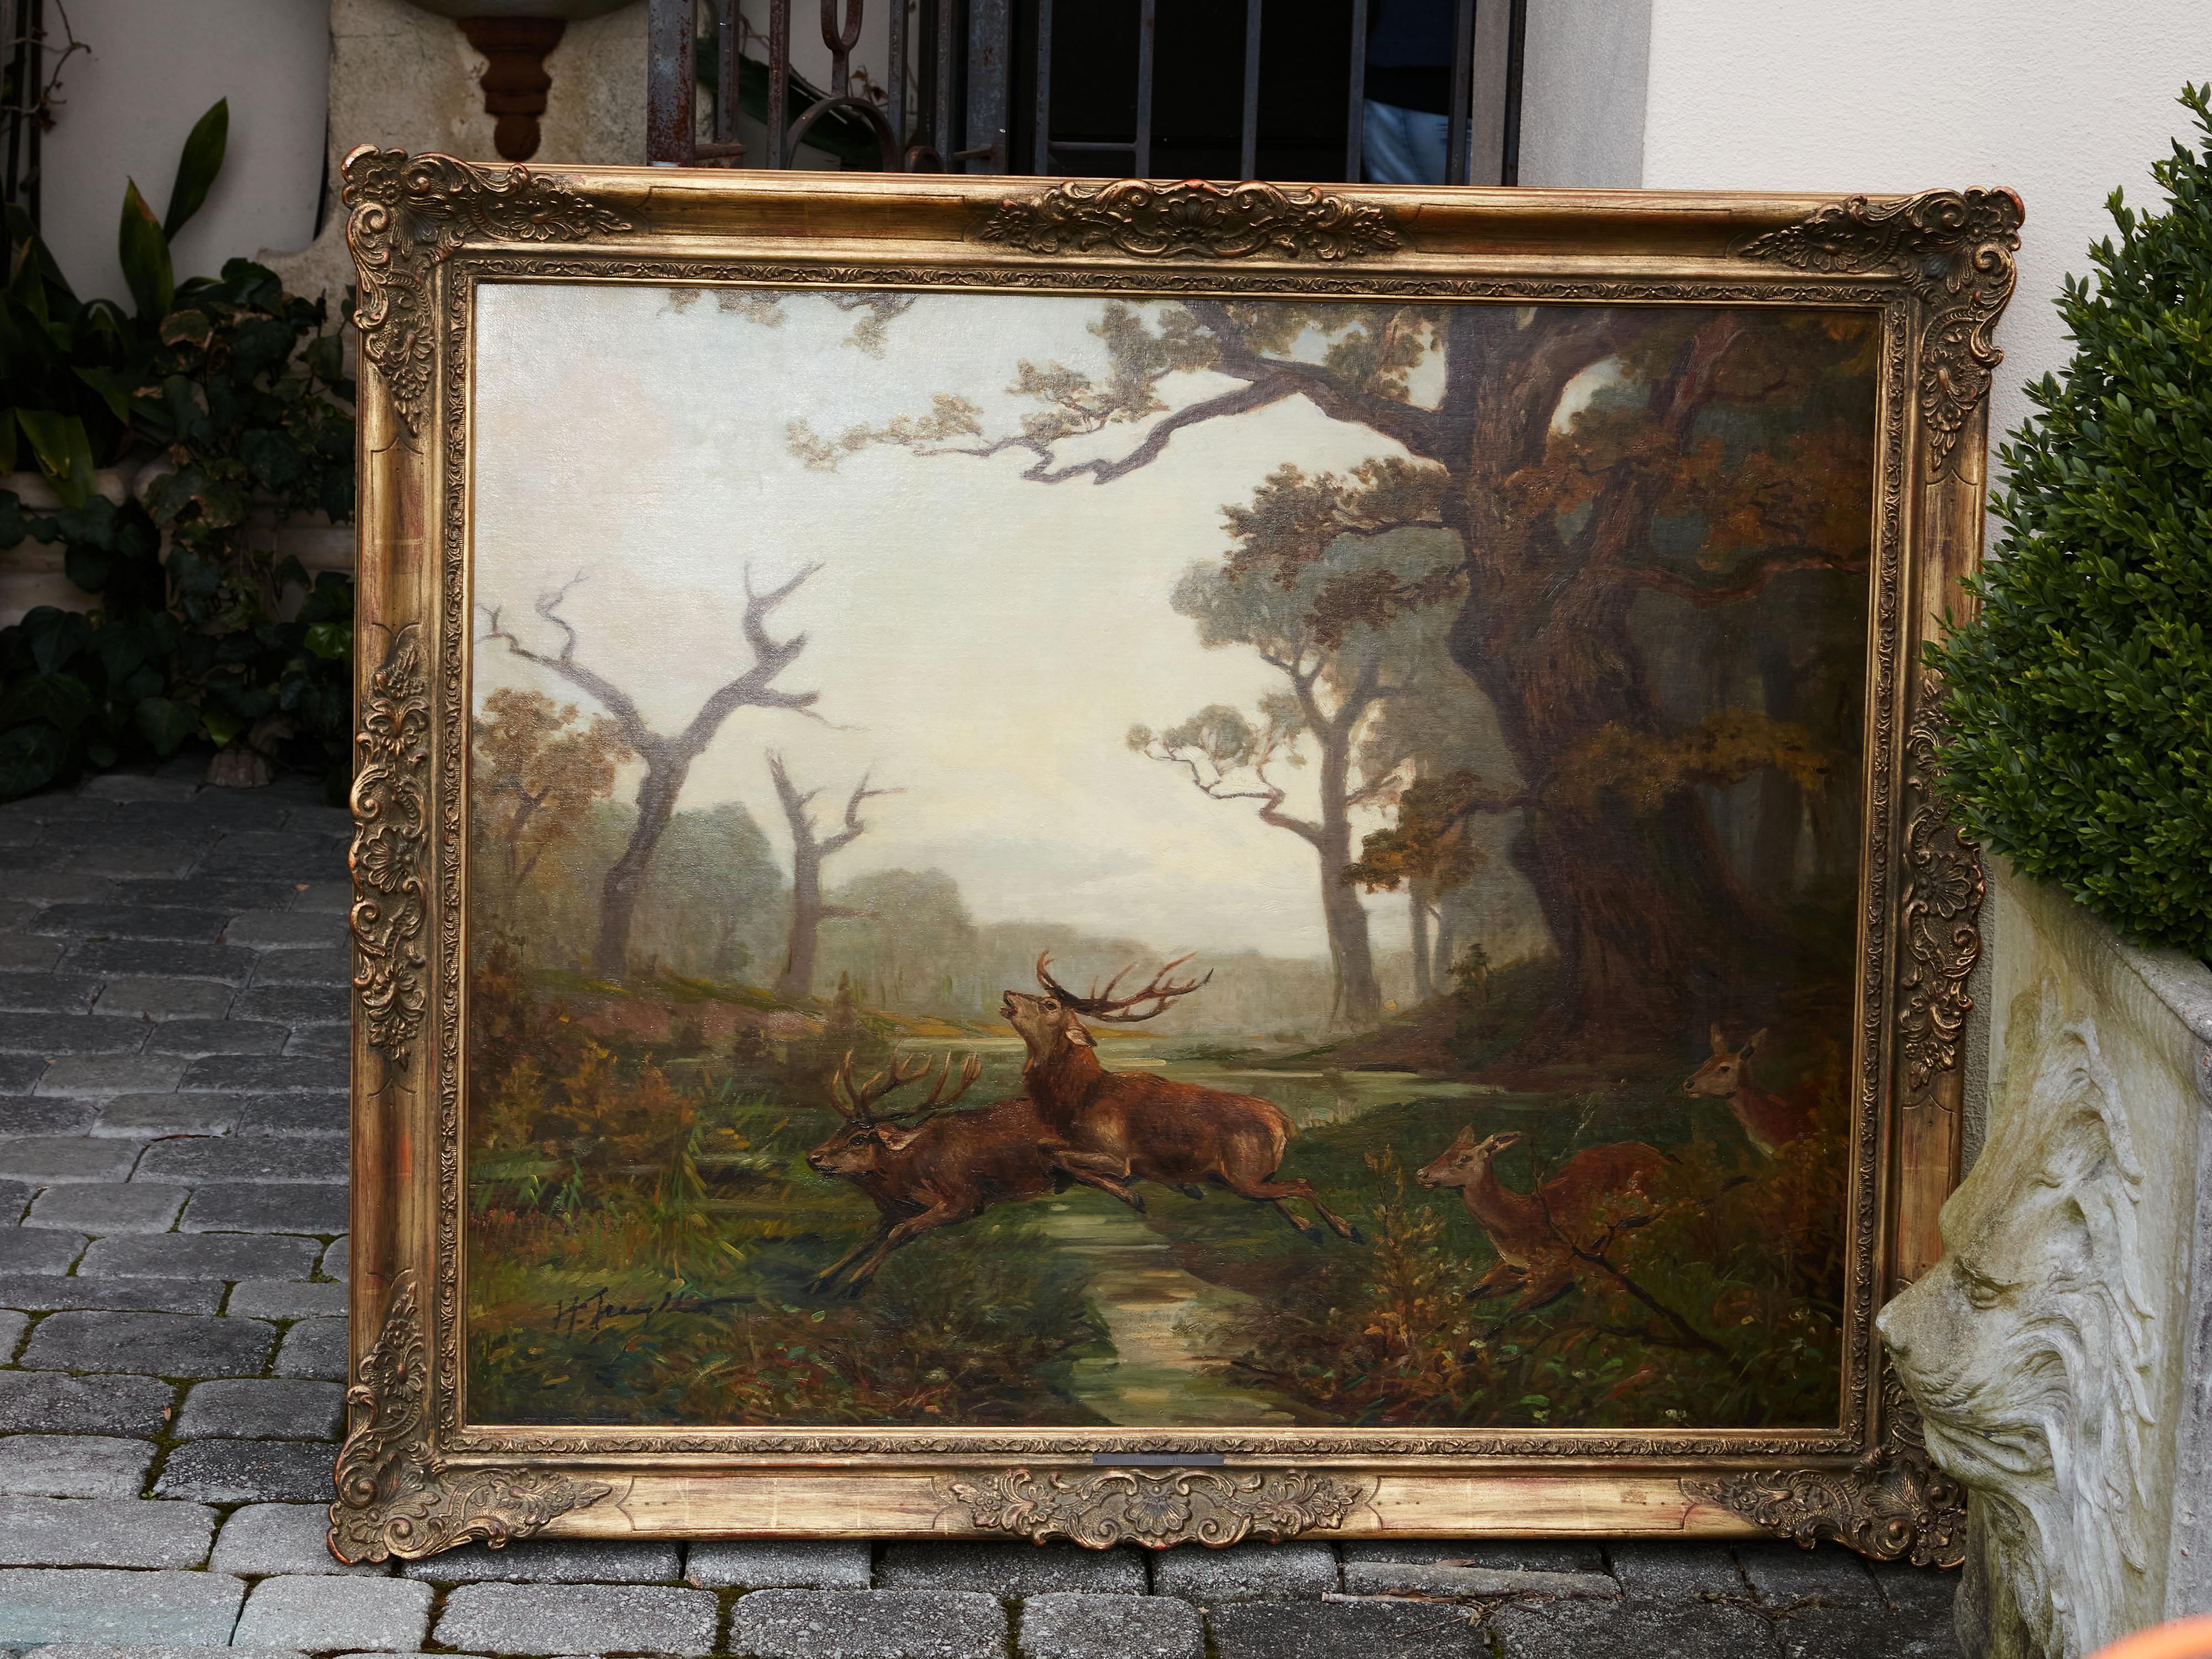 Carved Belgian Oil on Canvas Painting Depicting a Herd of Running Deer, circa 1900-1940